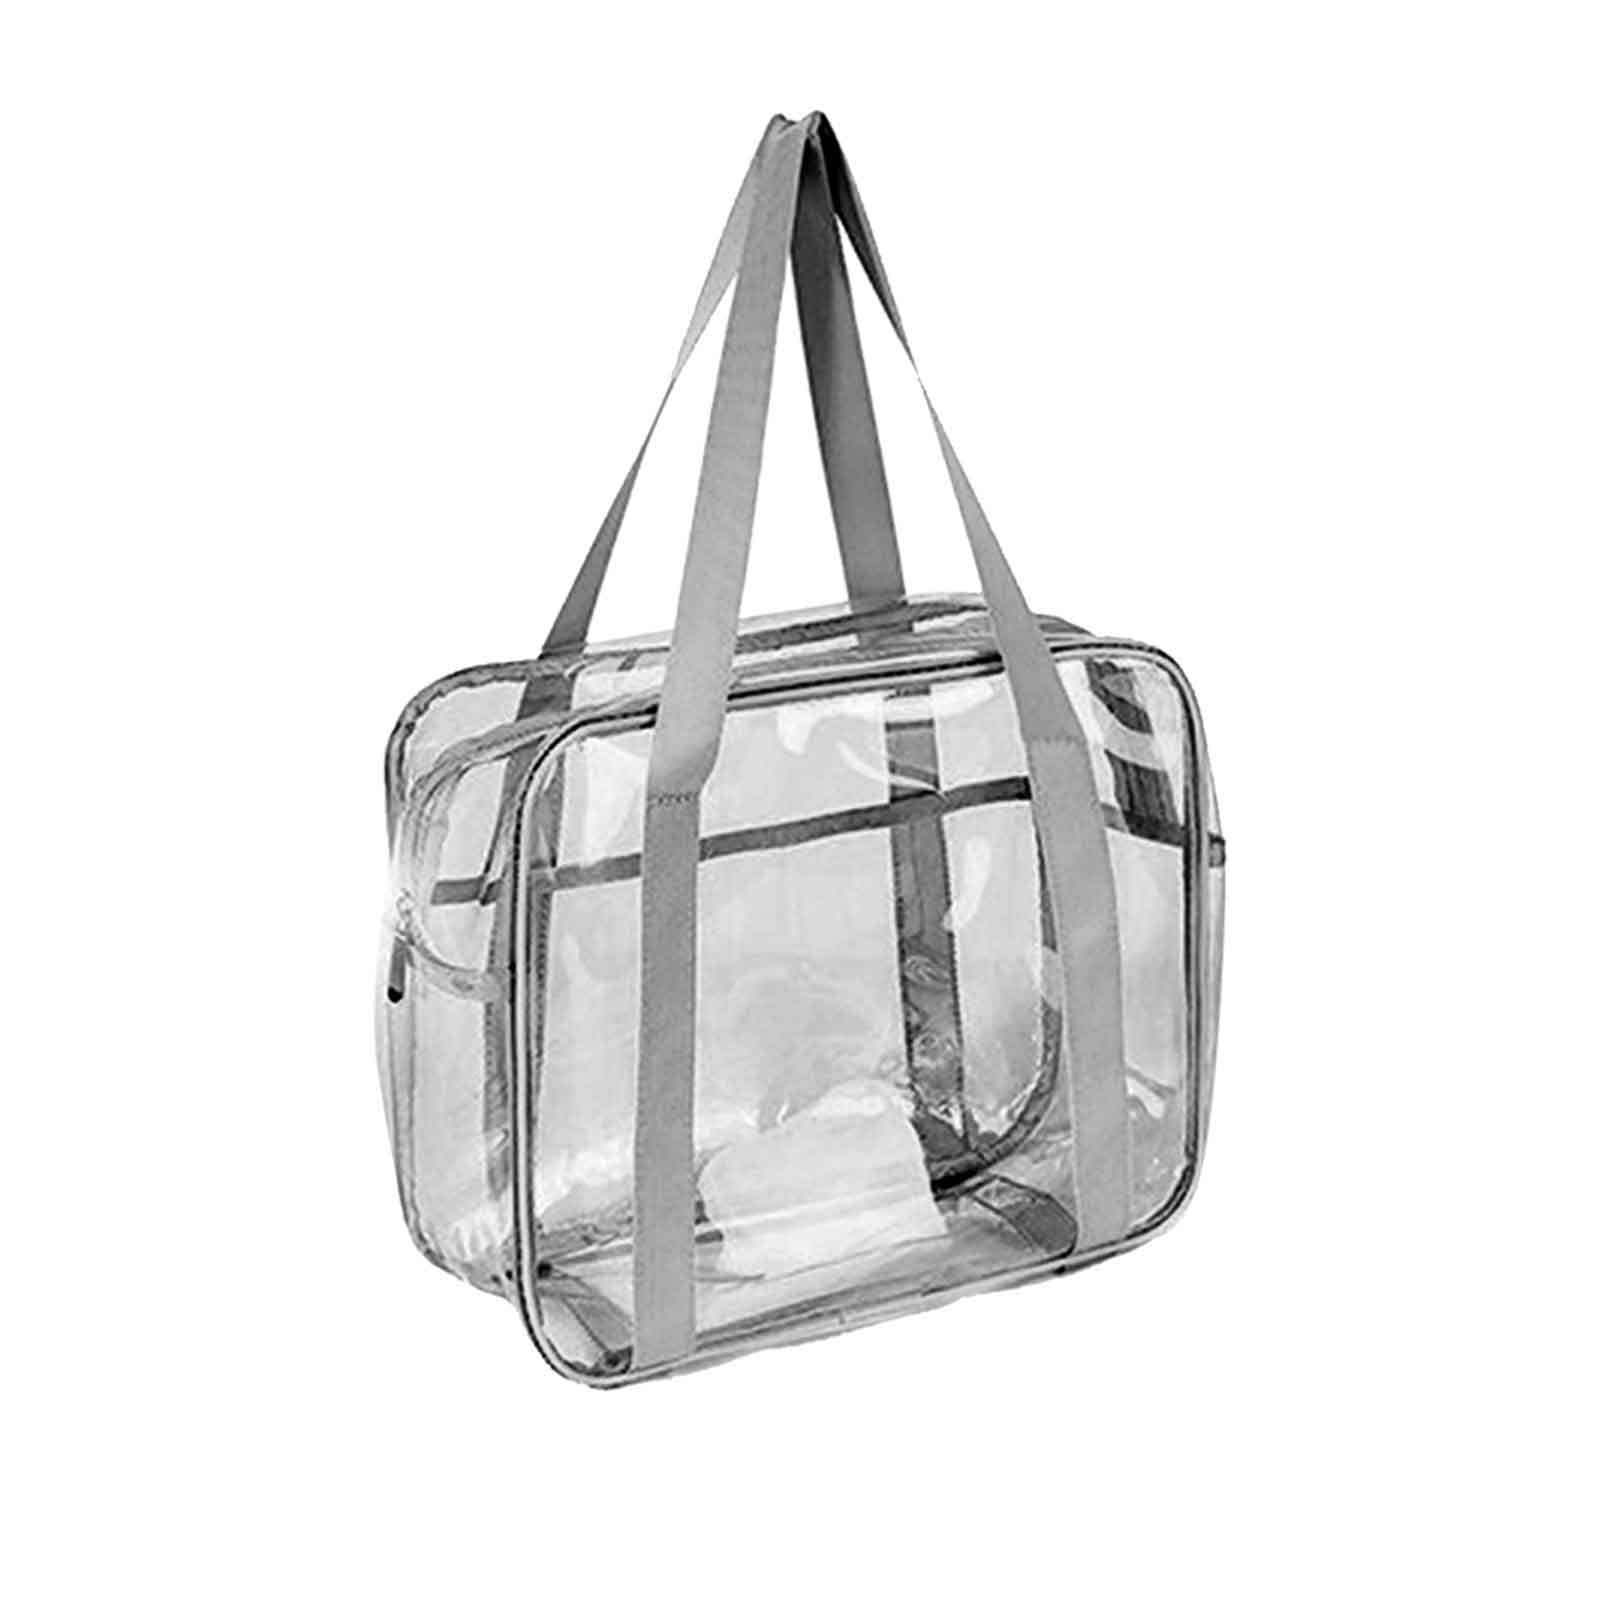 Wovilon Clear Bag for Travel Plastic Clear Tote Bag with Adjustable Strap Transparent See Through Bag Waterproof Stadium Approved 133d2dac b259 4569 a8f0 090ce43550e0.65d23d482b009c1b75b4d18fd4bc5085